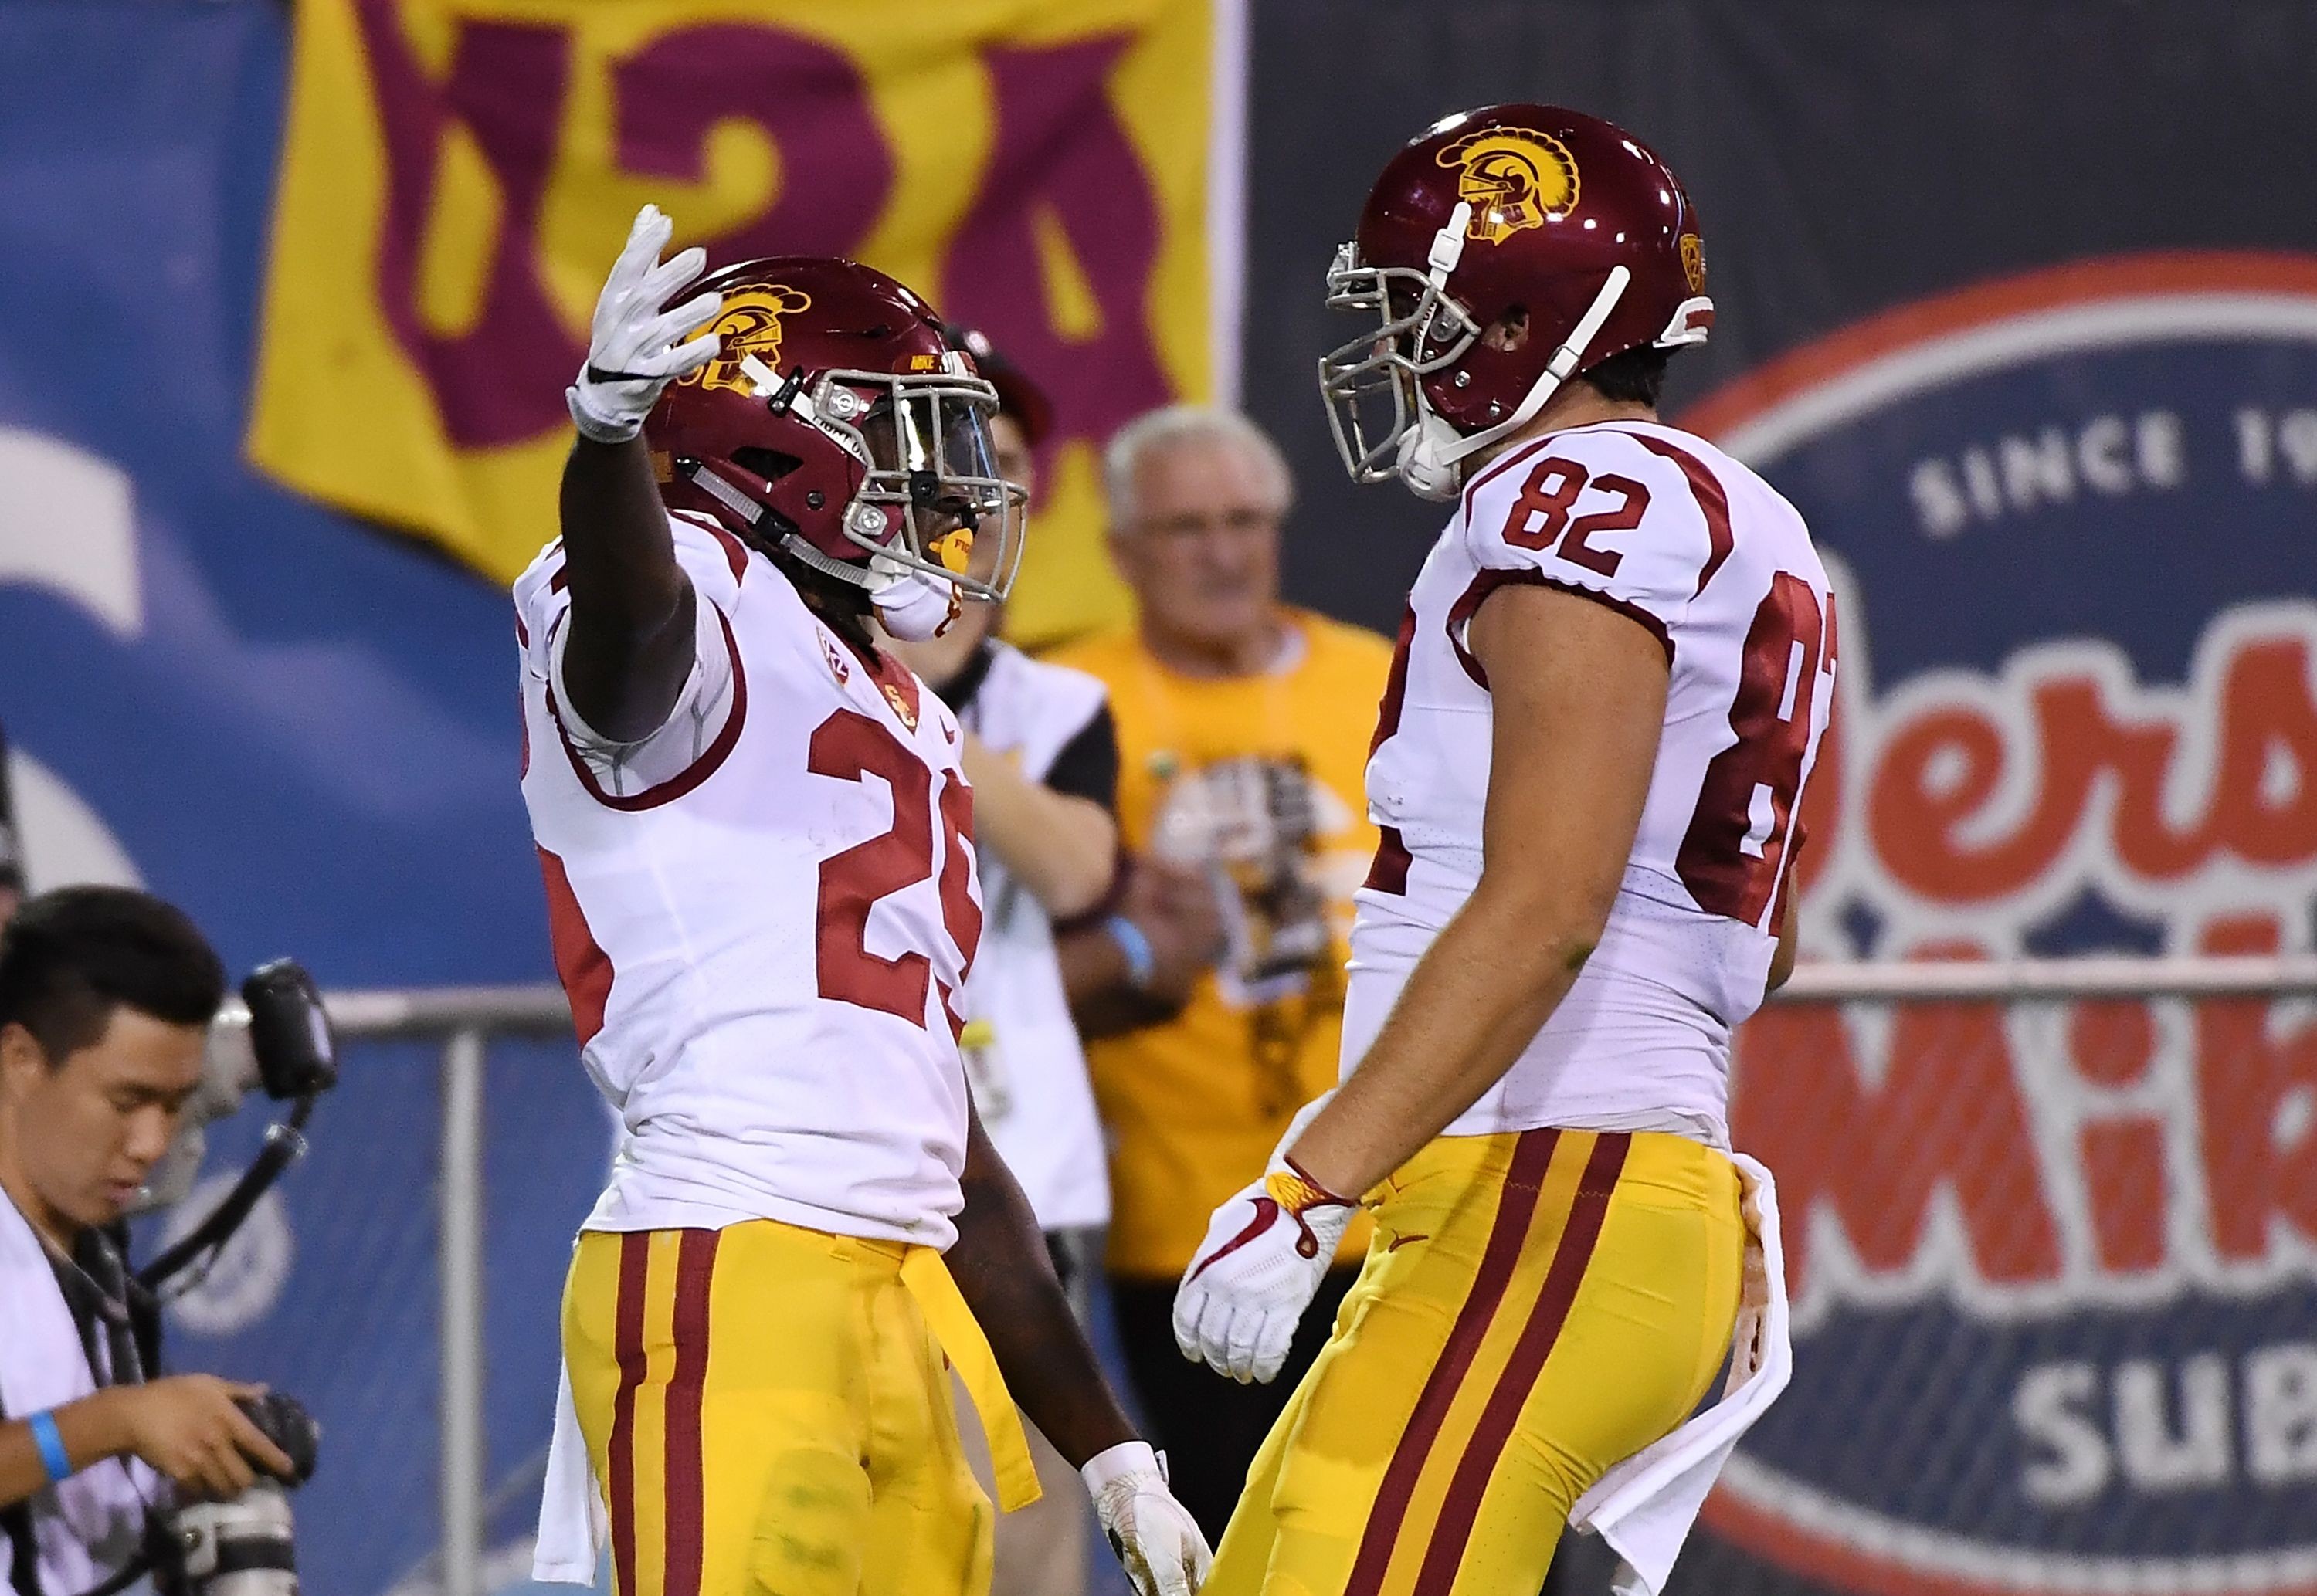 USC vs. ASU Studs and duds from Trojans’ blowout win